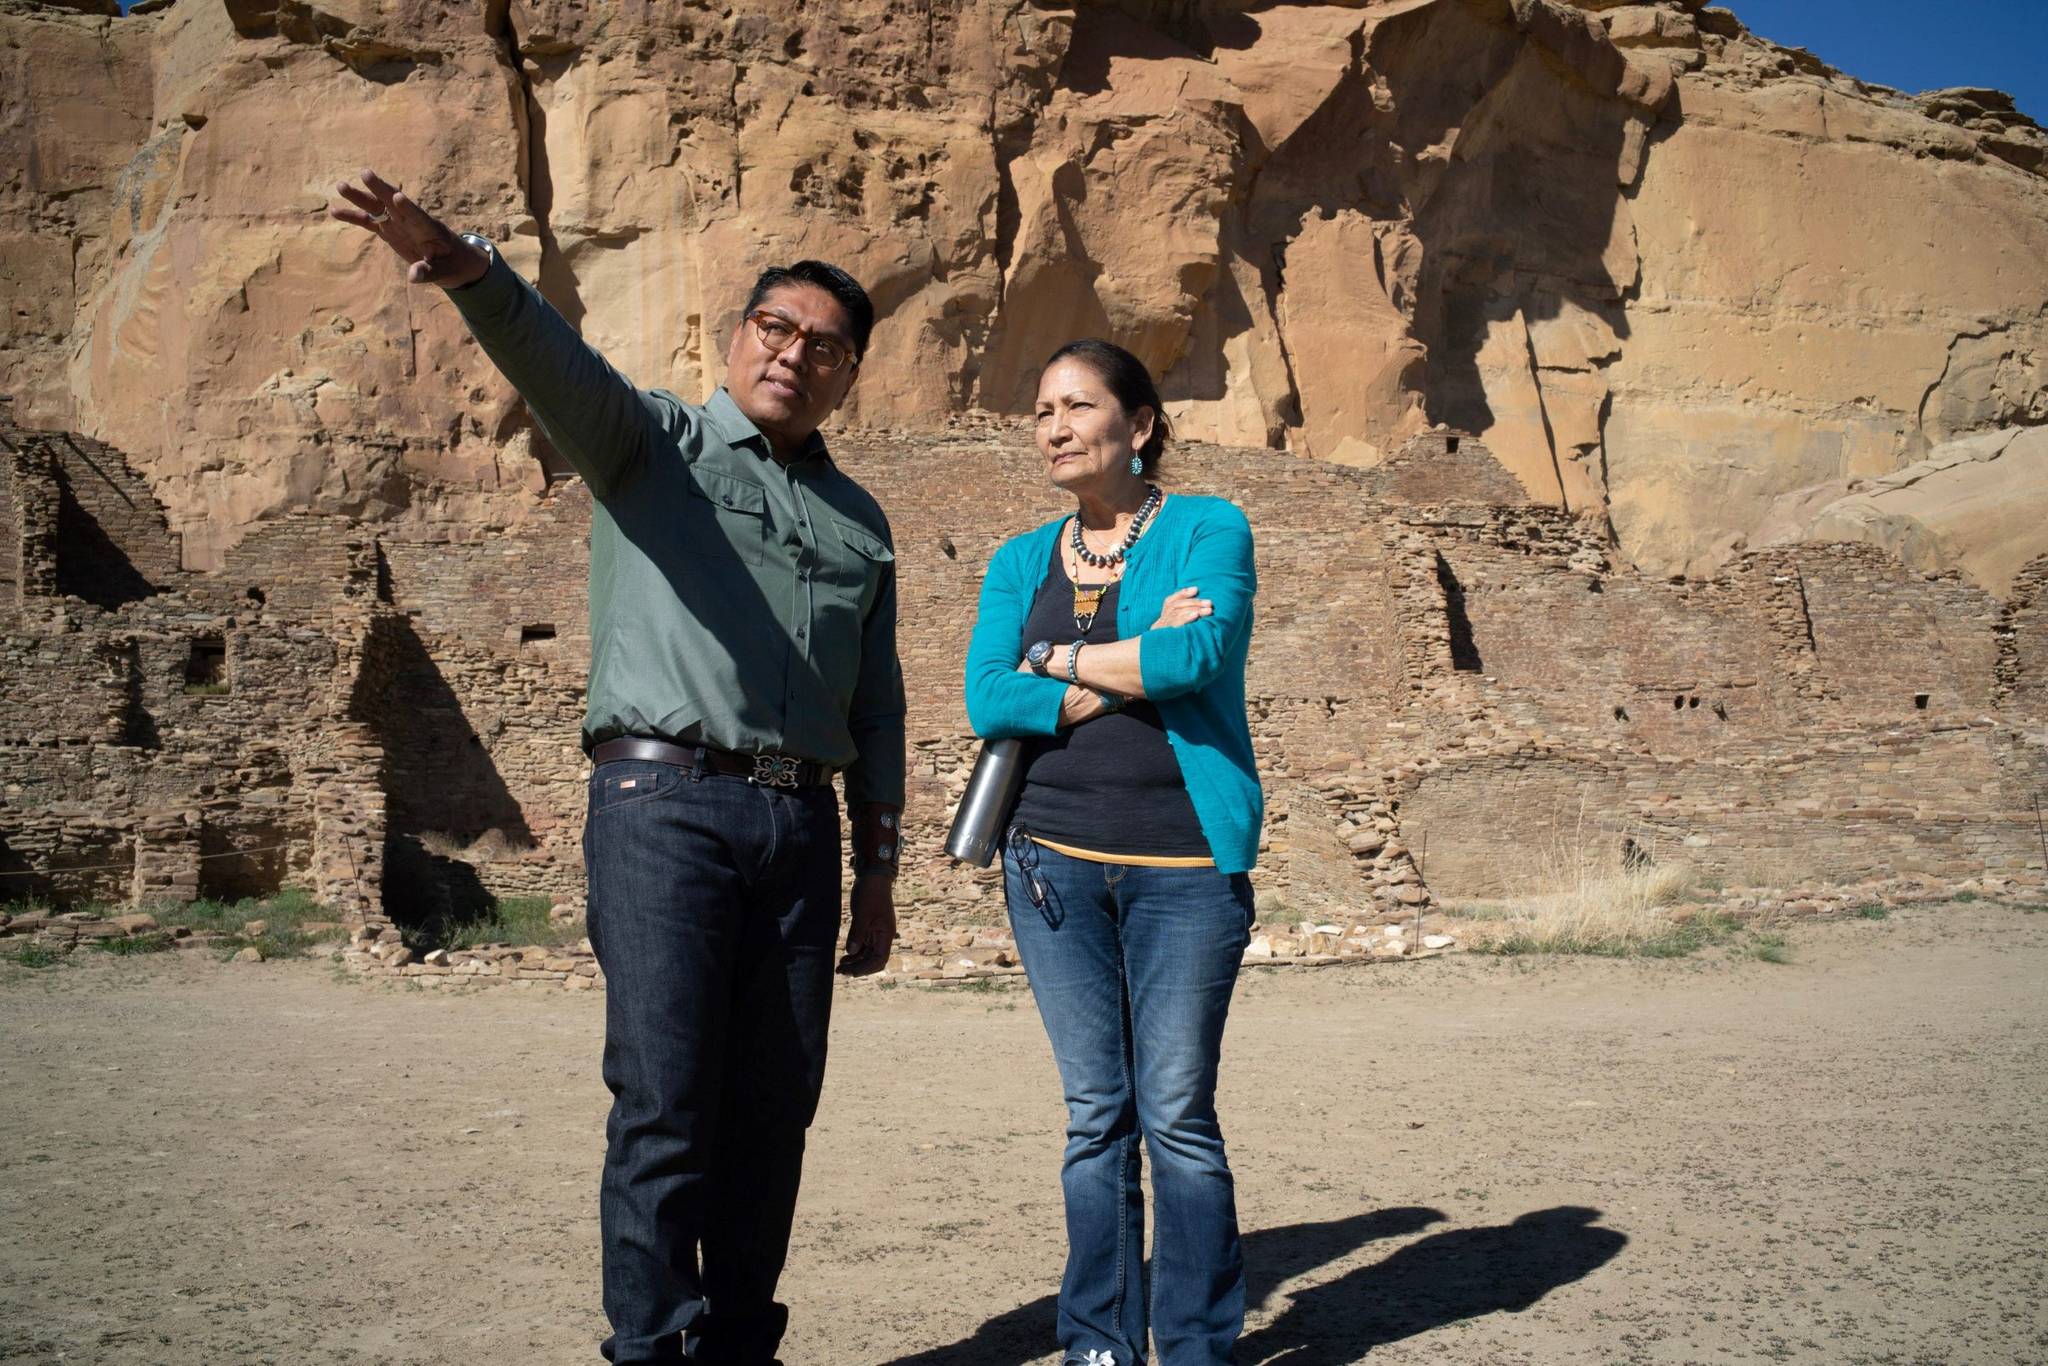 File photo
U.S. Rep. Deb Haaland, right, at Chaco Culture National Historical Park in New Mexico.